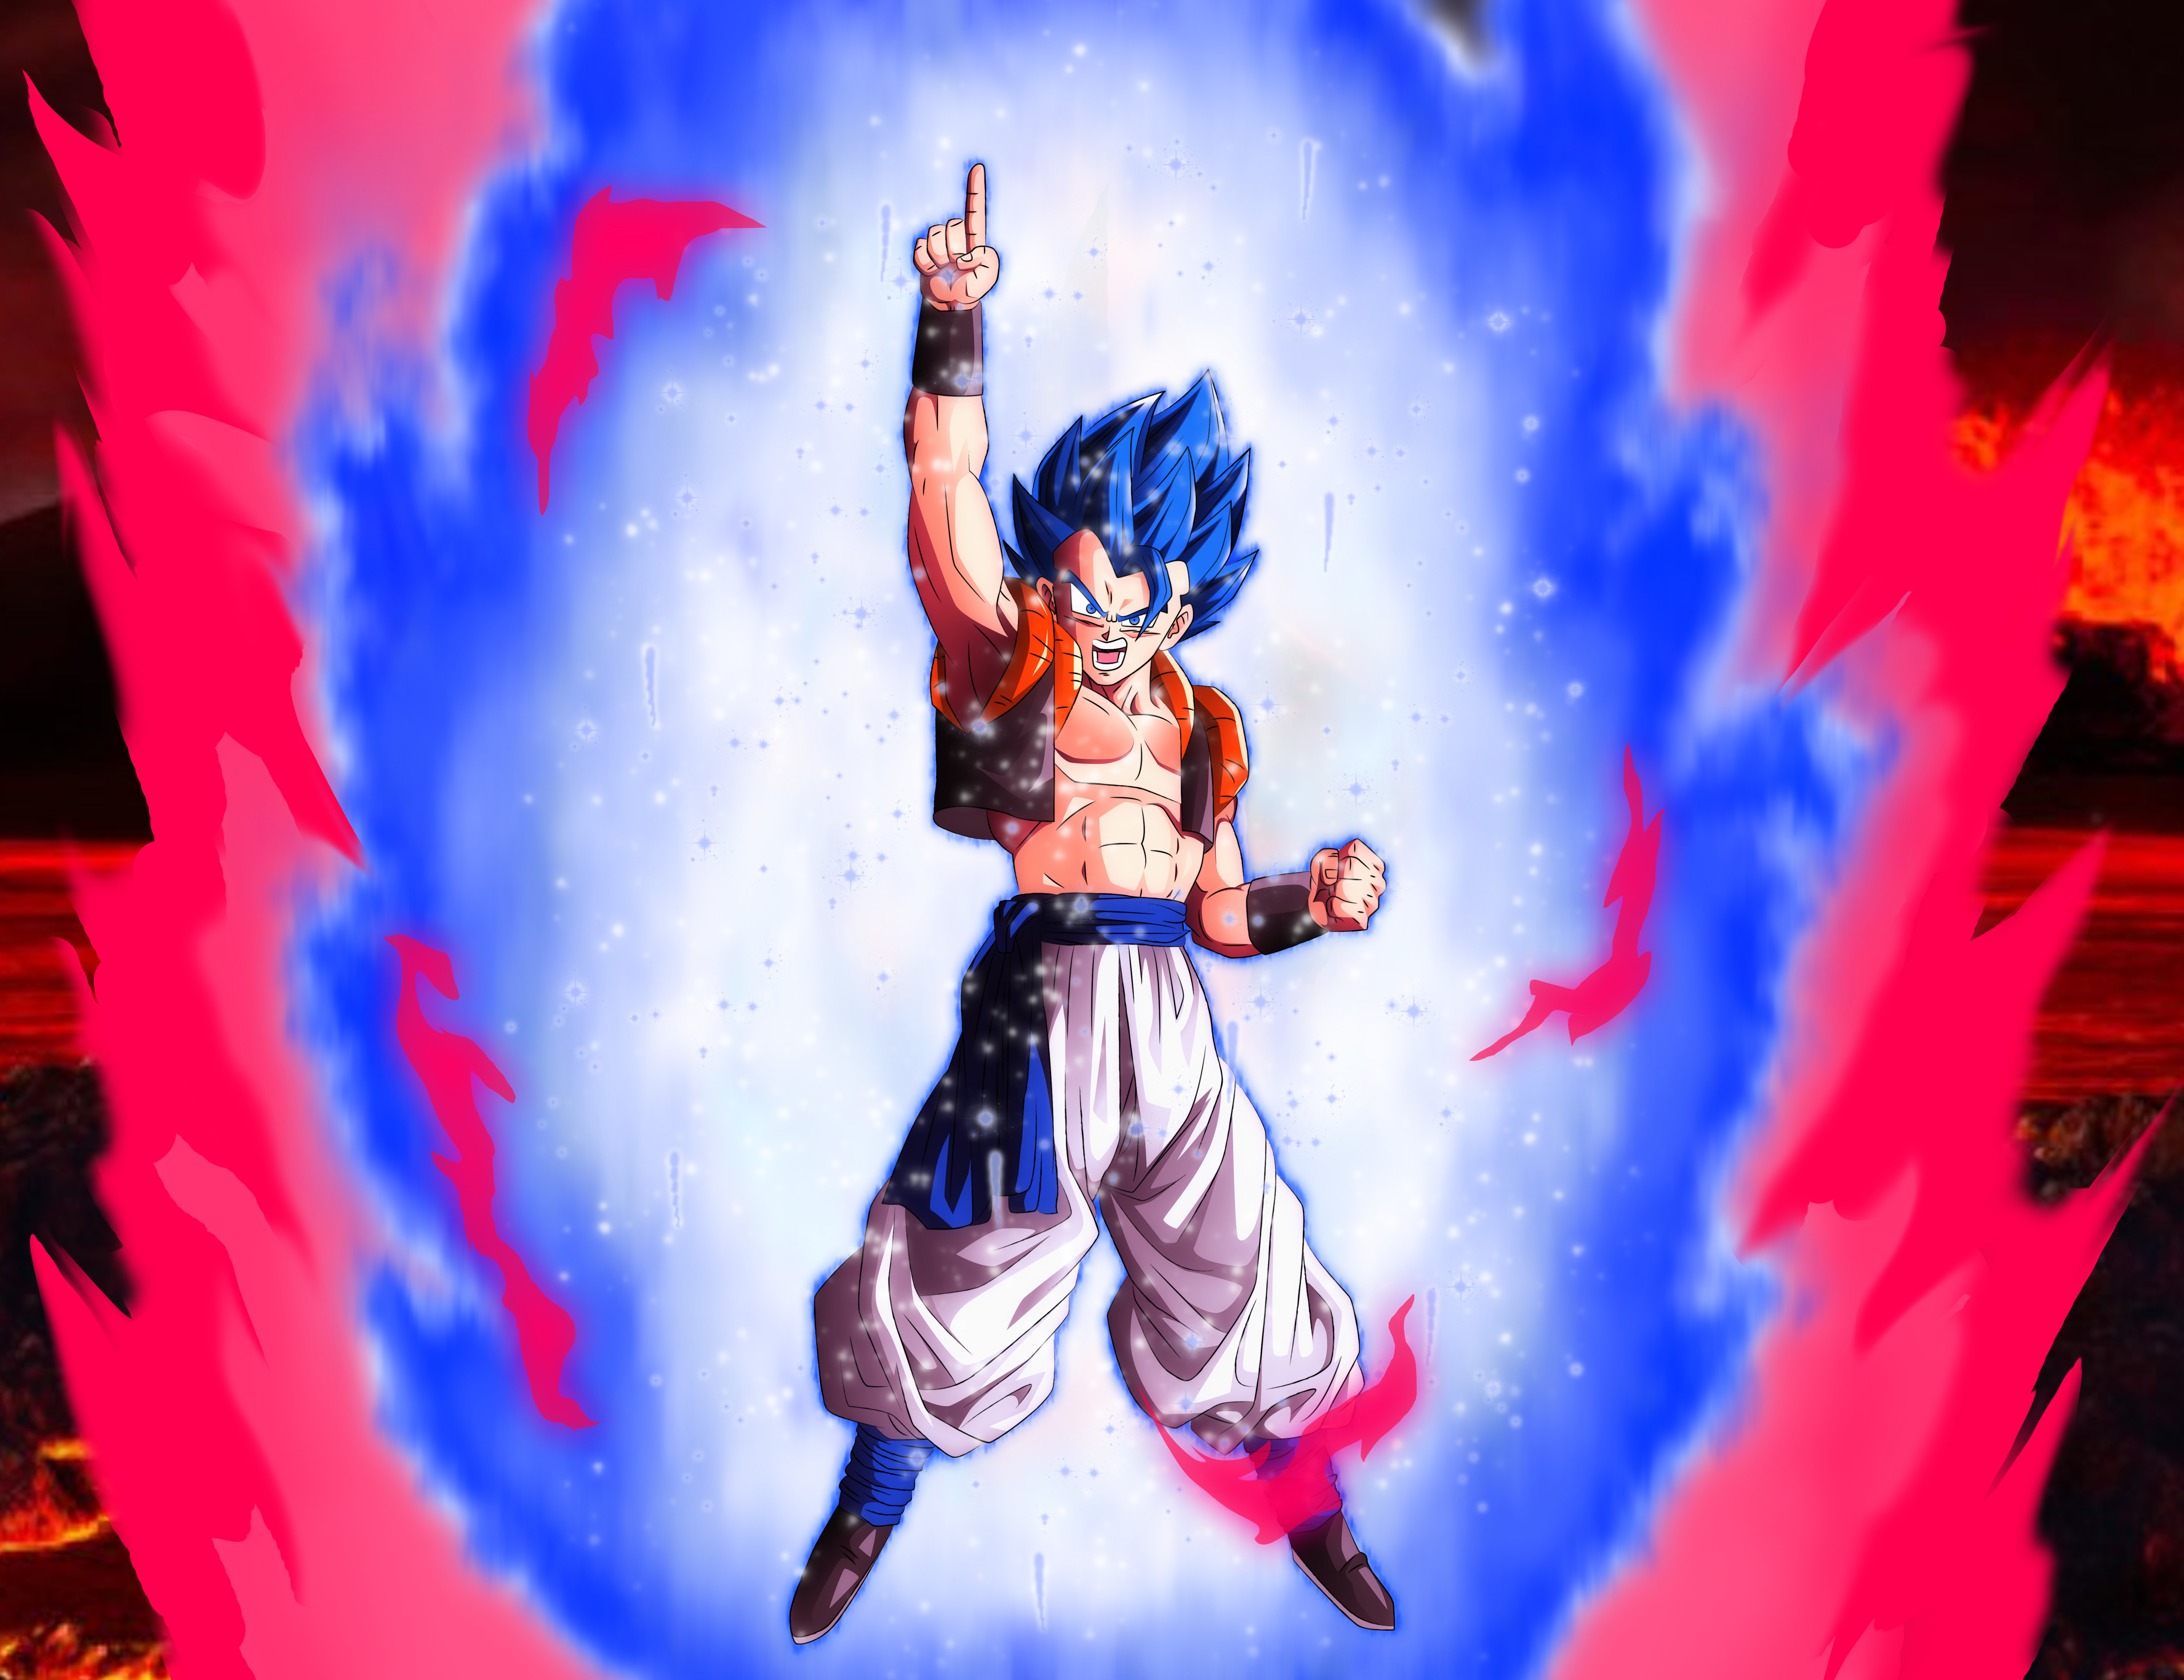 Gogeta blue - Mobile Abyss